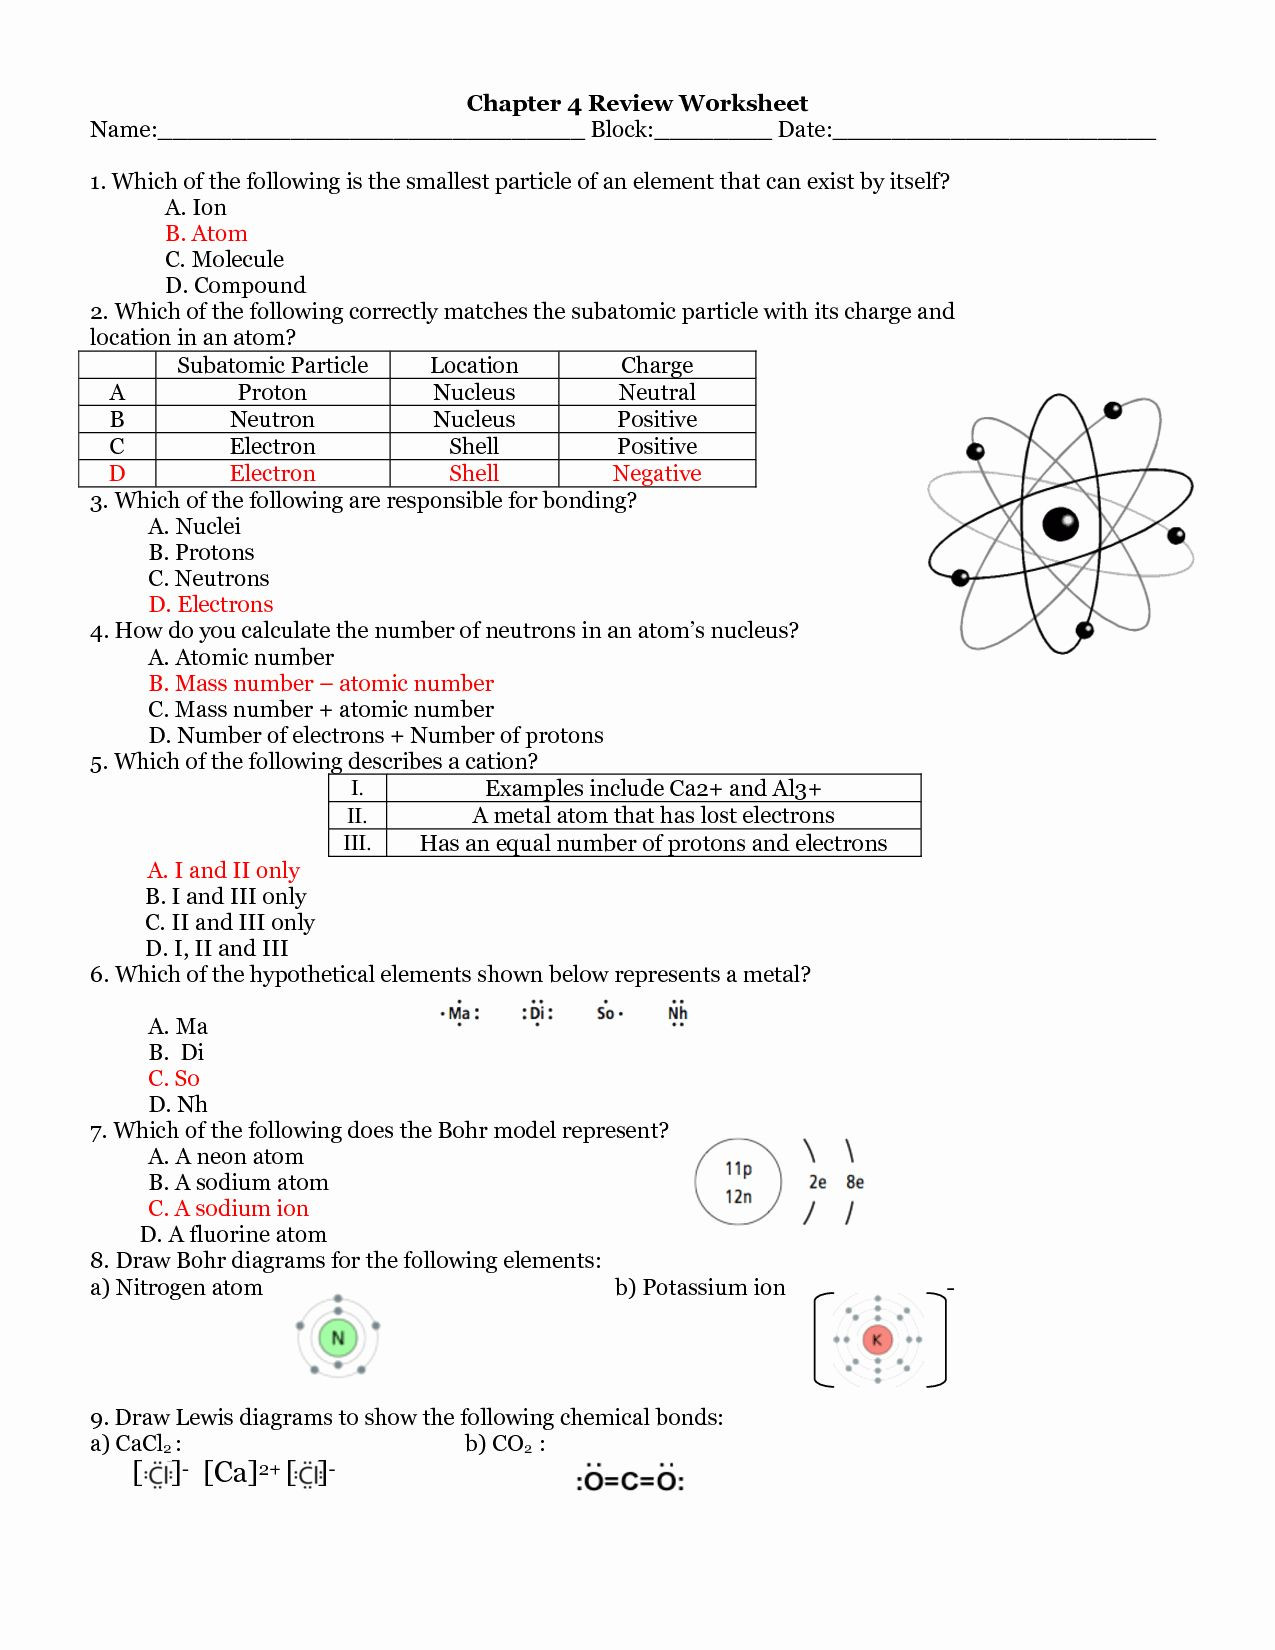 Atoms and Ions Worksheet Answers atoms and Ions Worksheet Answers Luxury atomic Structure